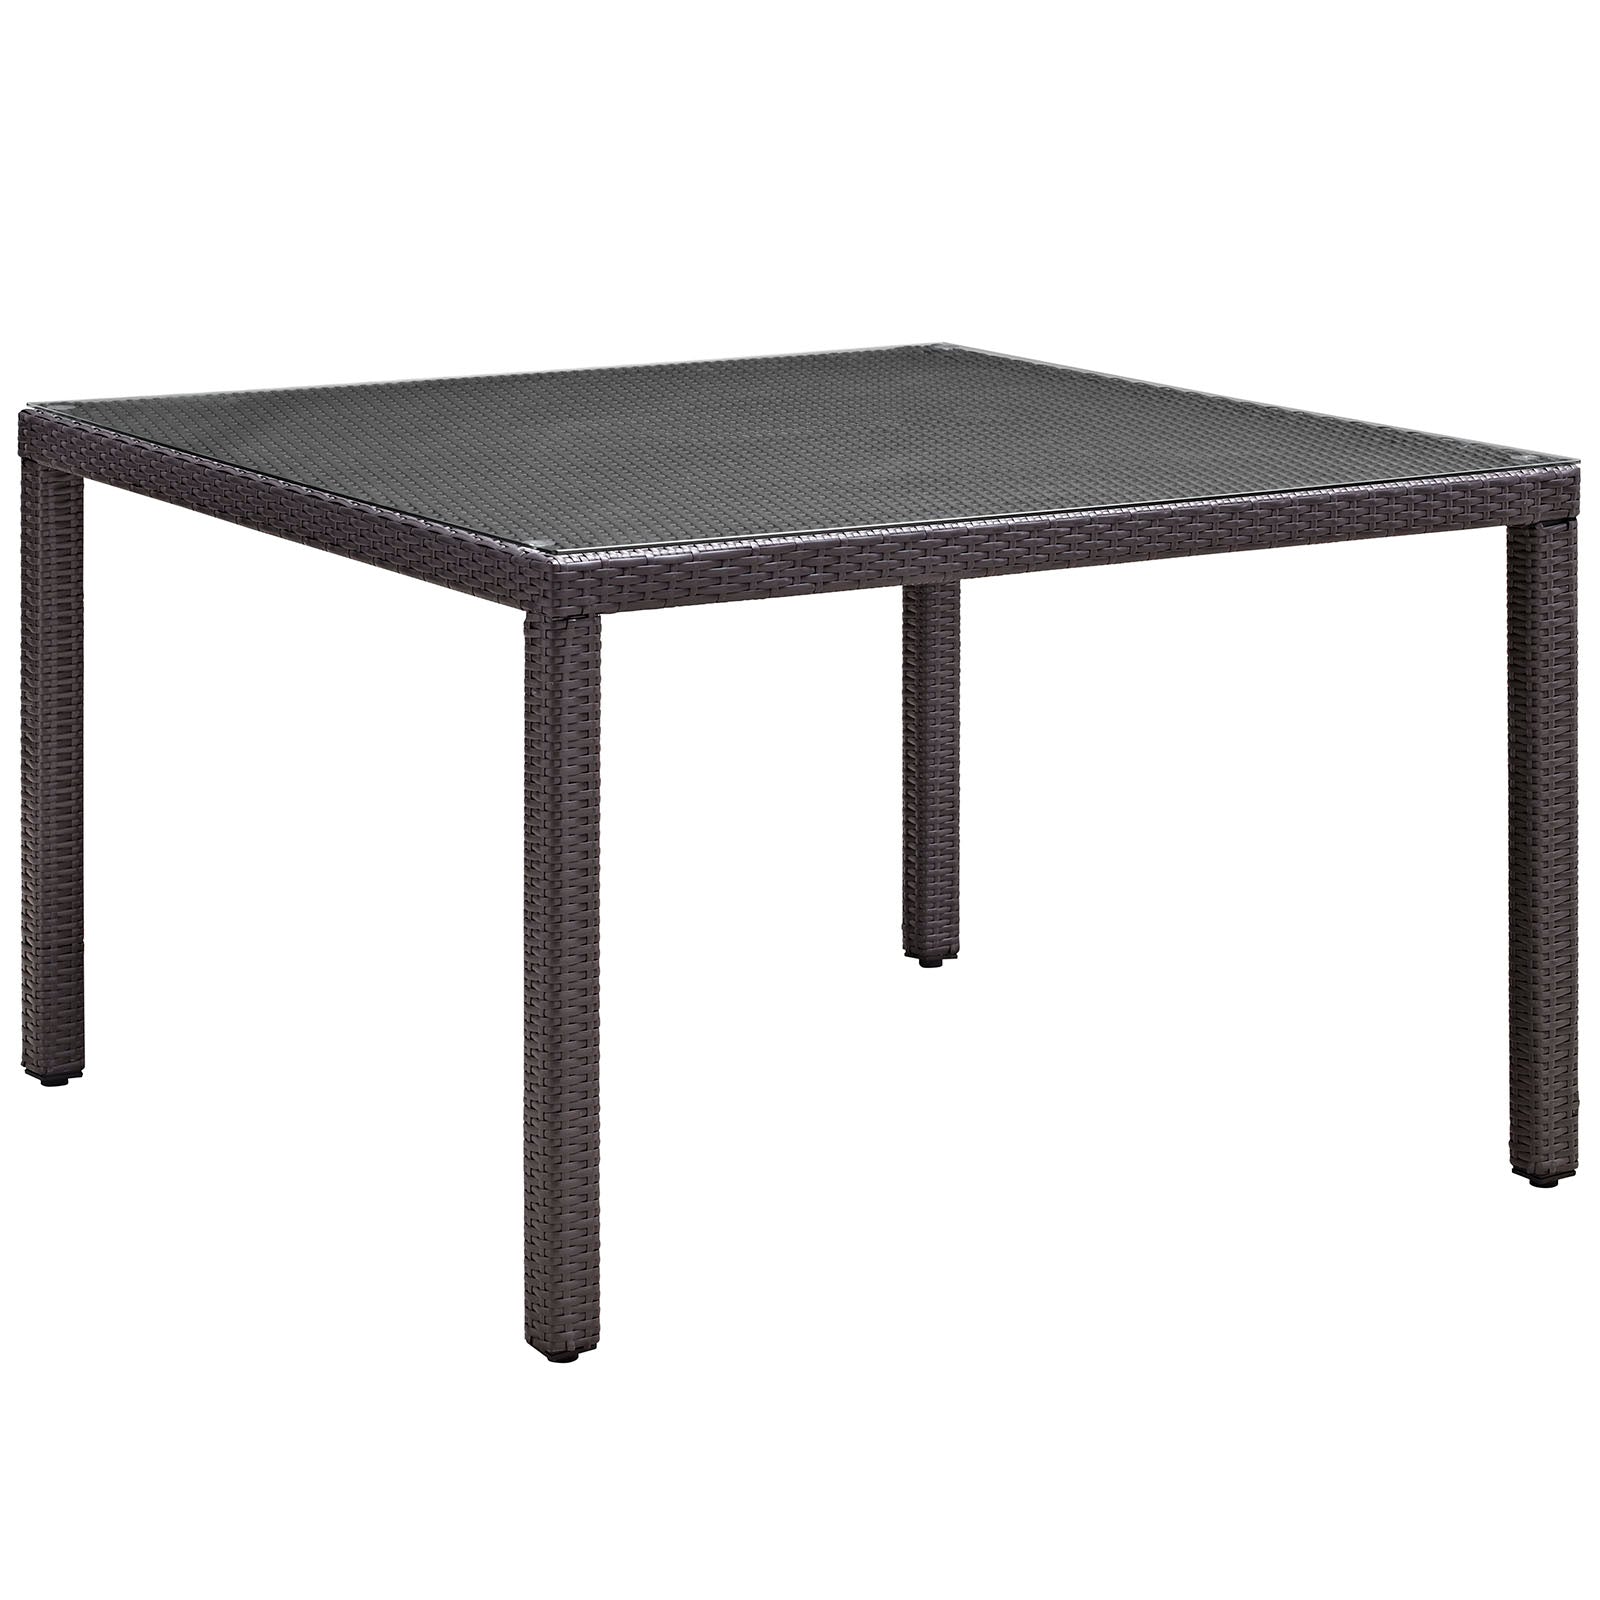 Convene 47" Square Outdoor Patio Glass Top Dining Table